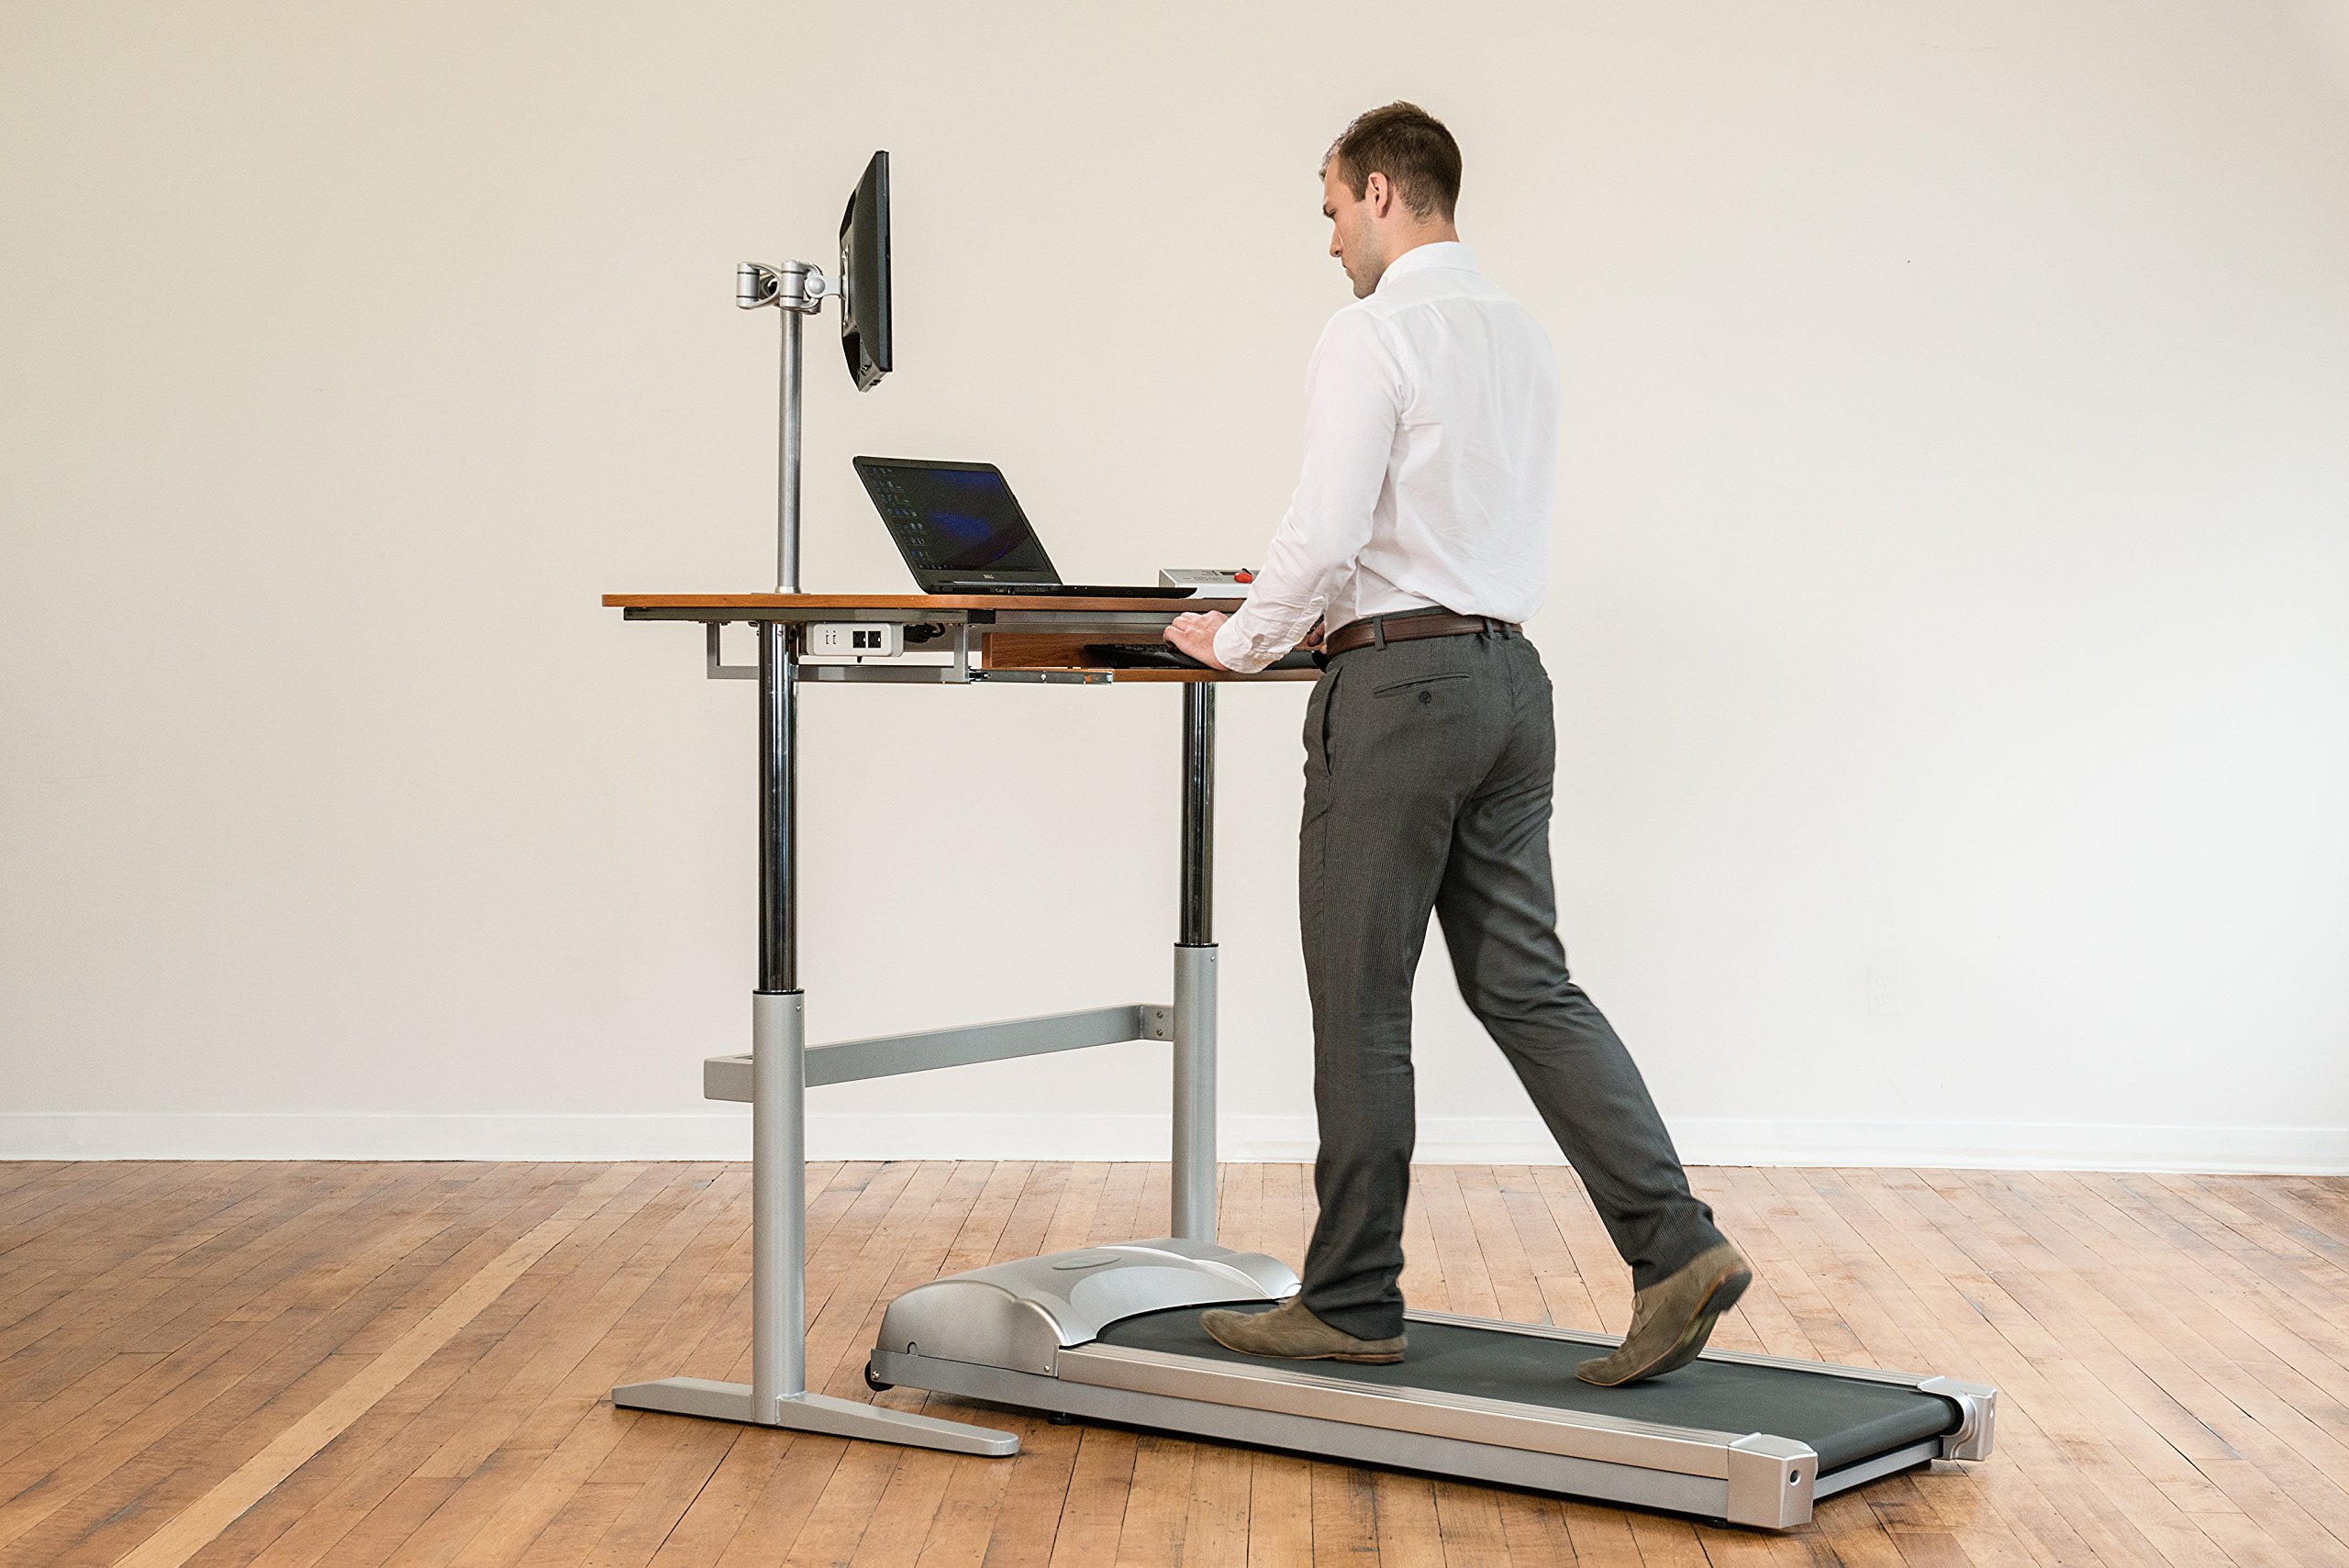 How the 2 IN 1 Treadmill Can Benefit Your Workout Routine